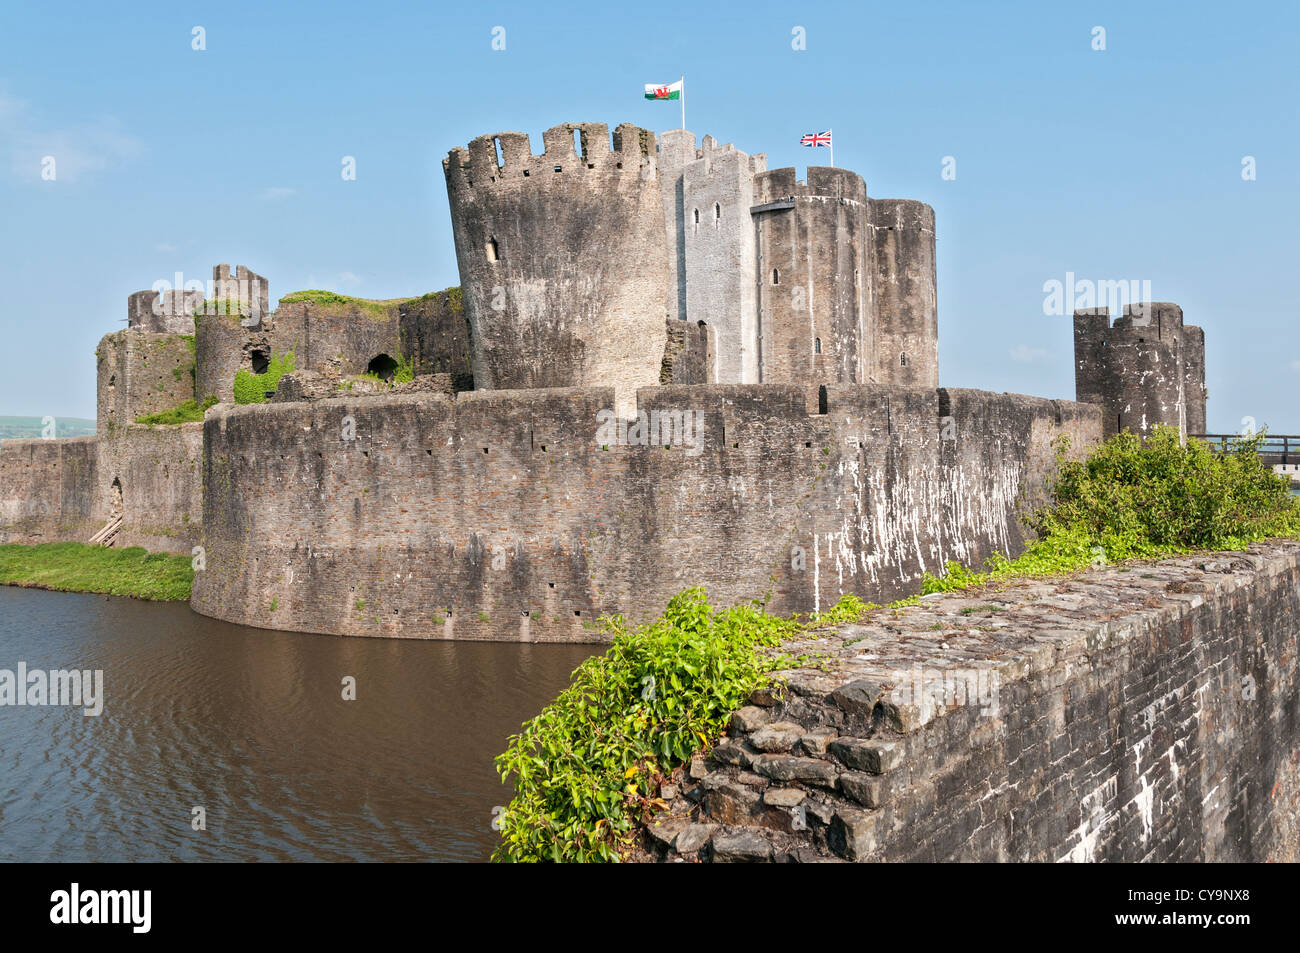 Wales, Caerphilly Castle, construction began 1268, moat, Welsh flags Stock Photo